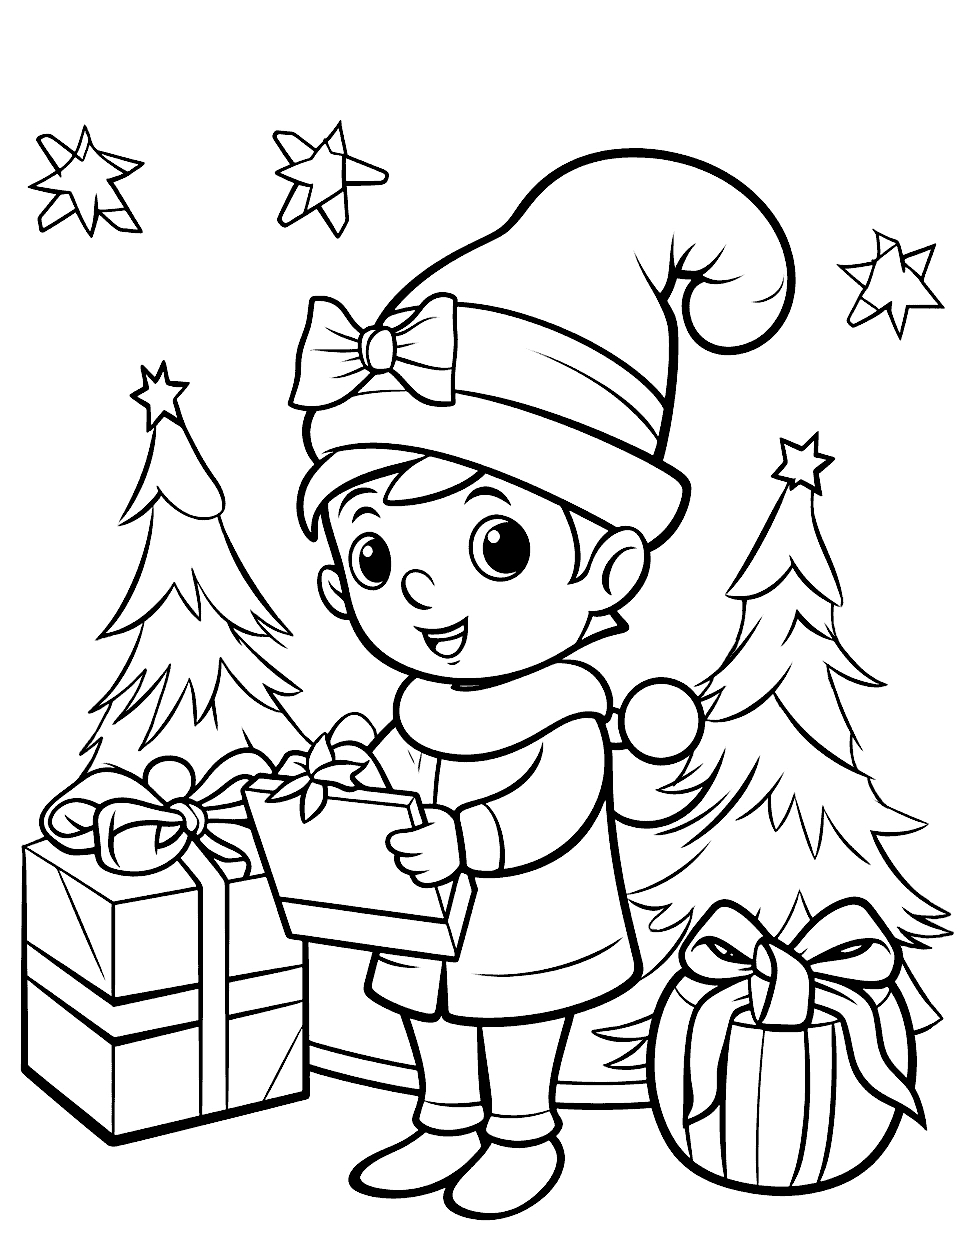 100 Christmas Coloring Pages: Free Printable Sheets - Free Printable Christmas Pictures To Colour